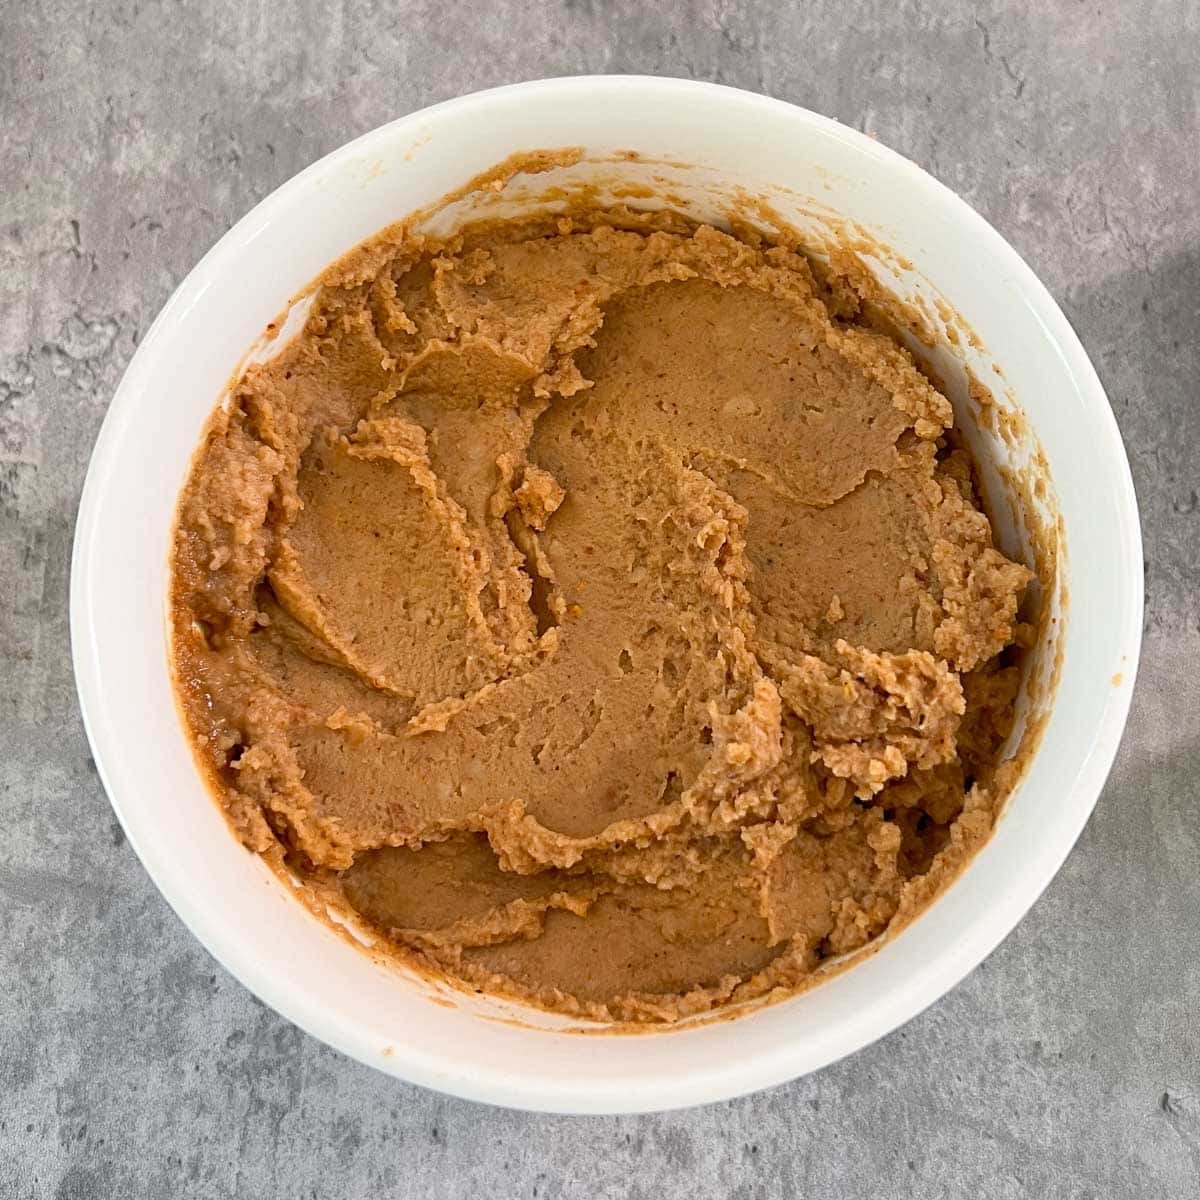 microwaved refried beans with taco seasoning mixed in